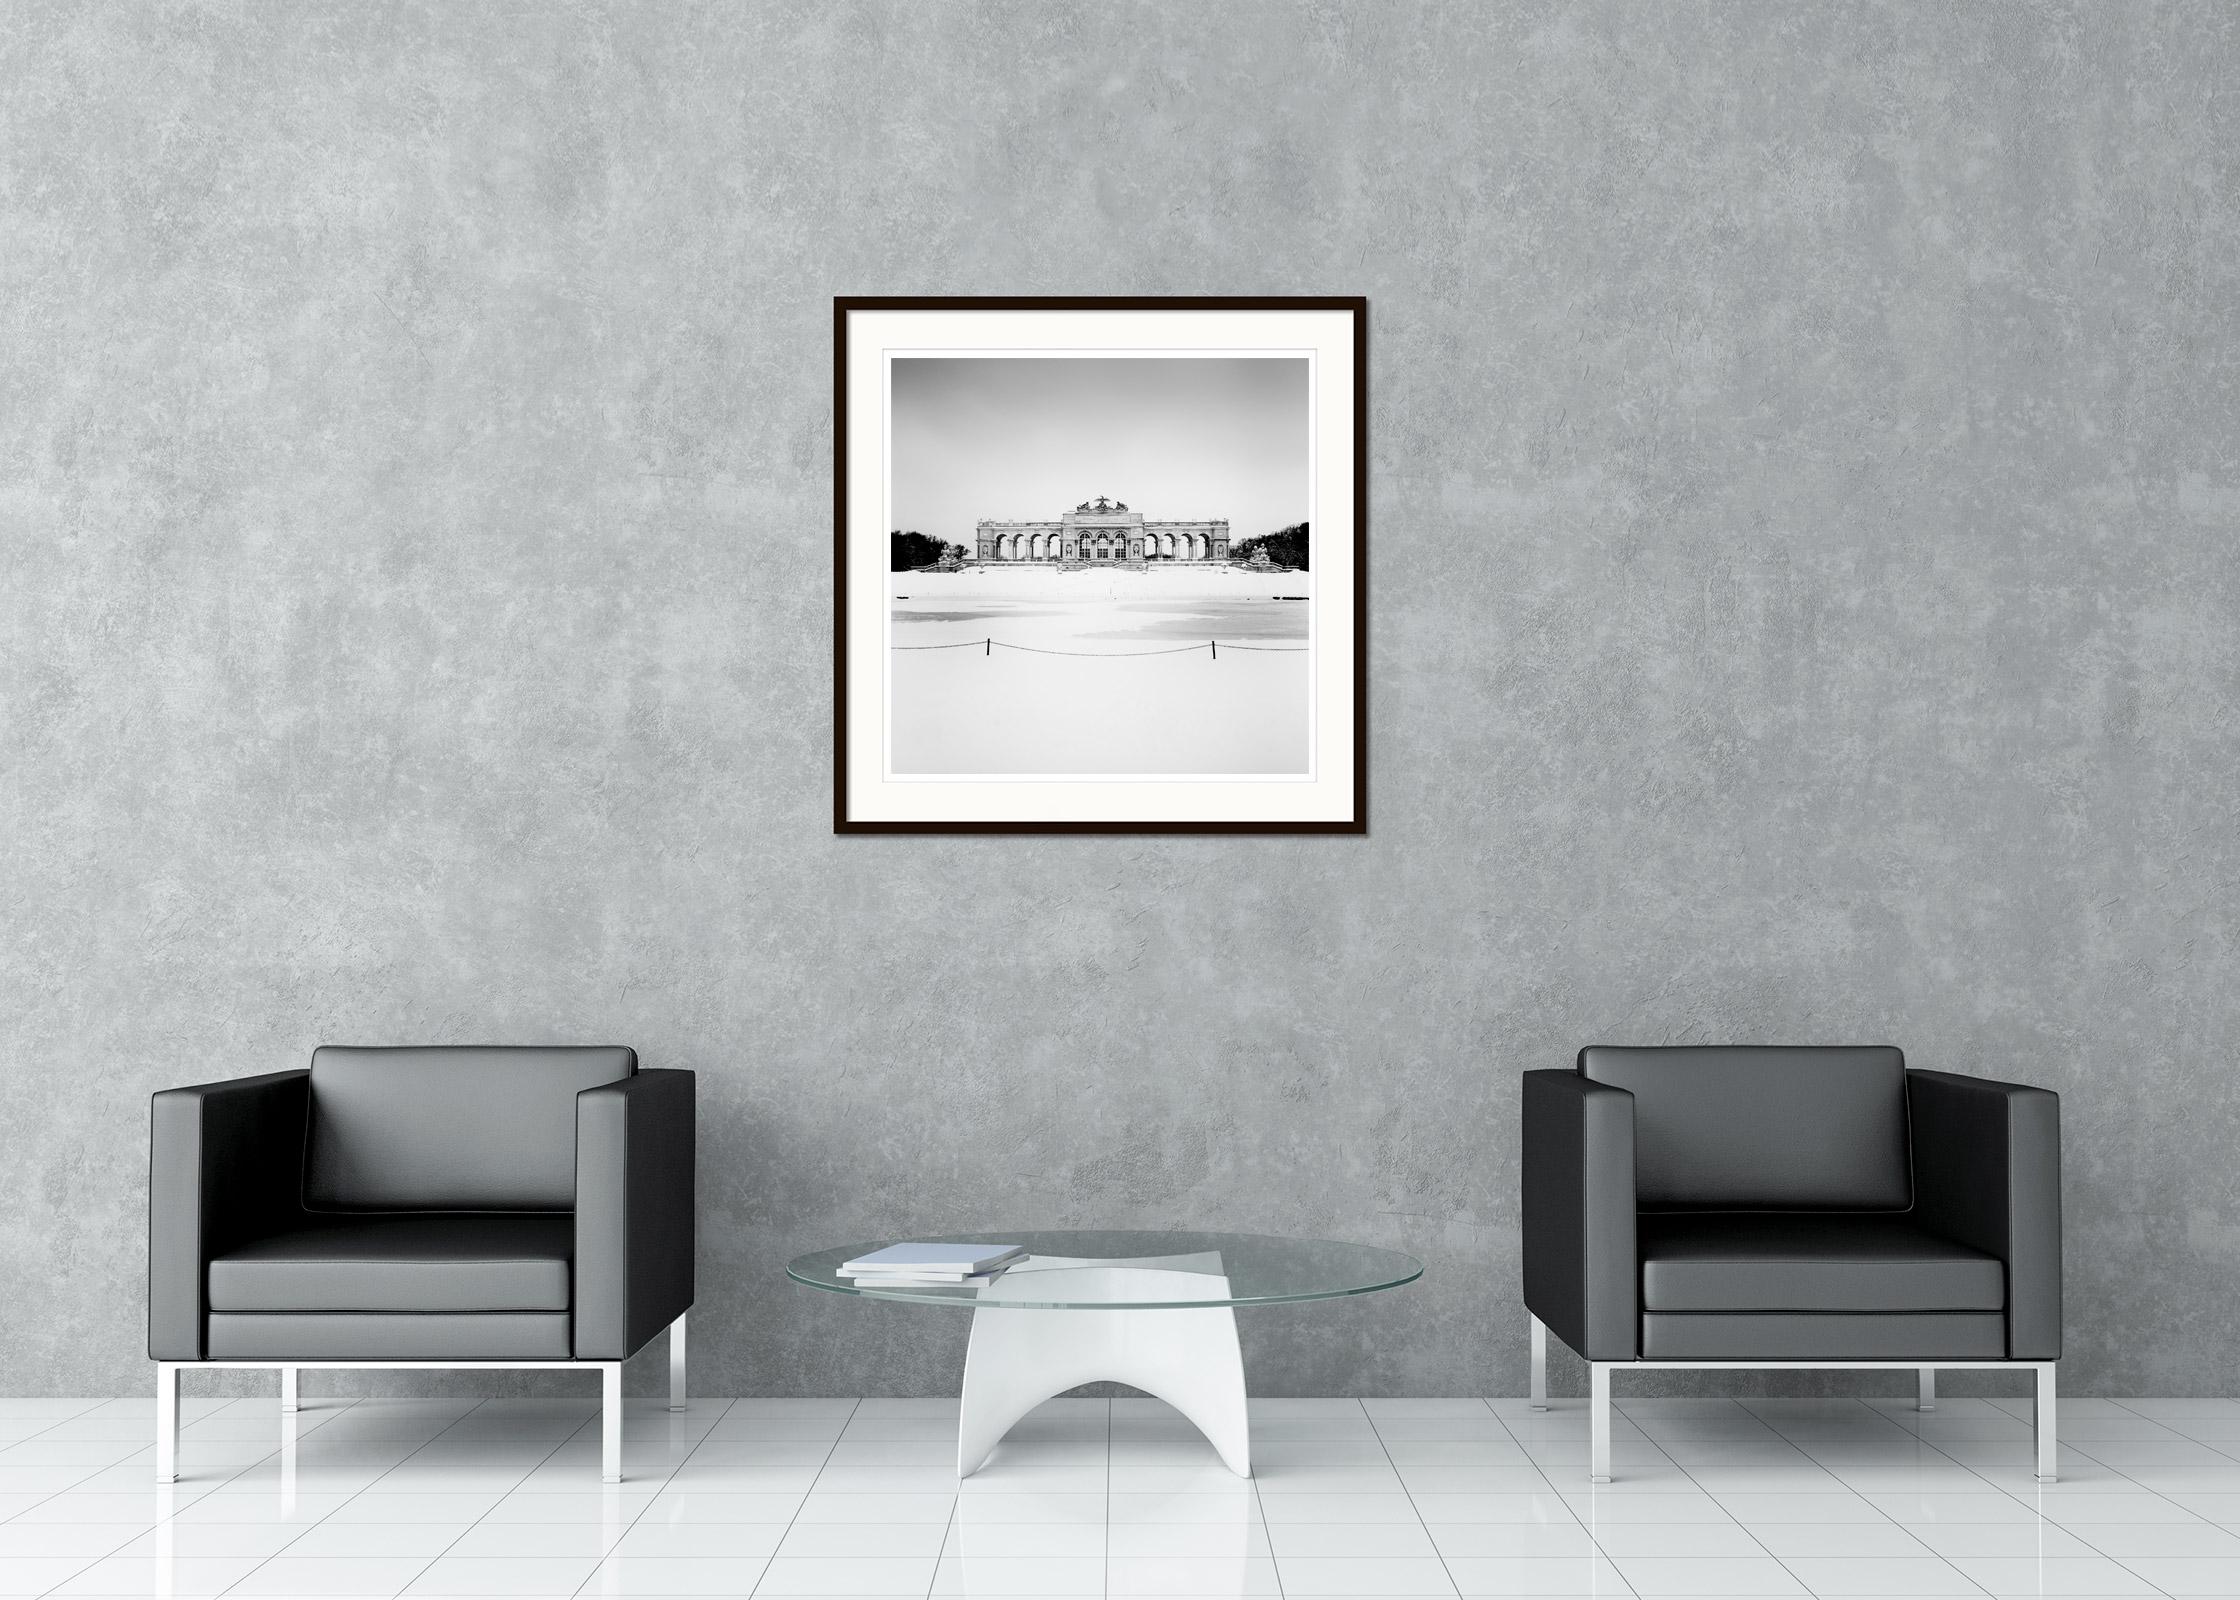 Gerald Berghammer - Limited edition of 20.
Archival fine art pigment print. Signed, titled, dated and numbered by artist. Certificate of authenticity included. Printed with 4cm white border.
15.75 x 15.75 in. (40 x 40 cm) edition of 20
23.63 x 23.63